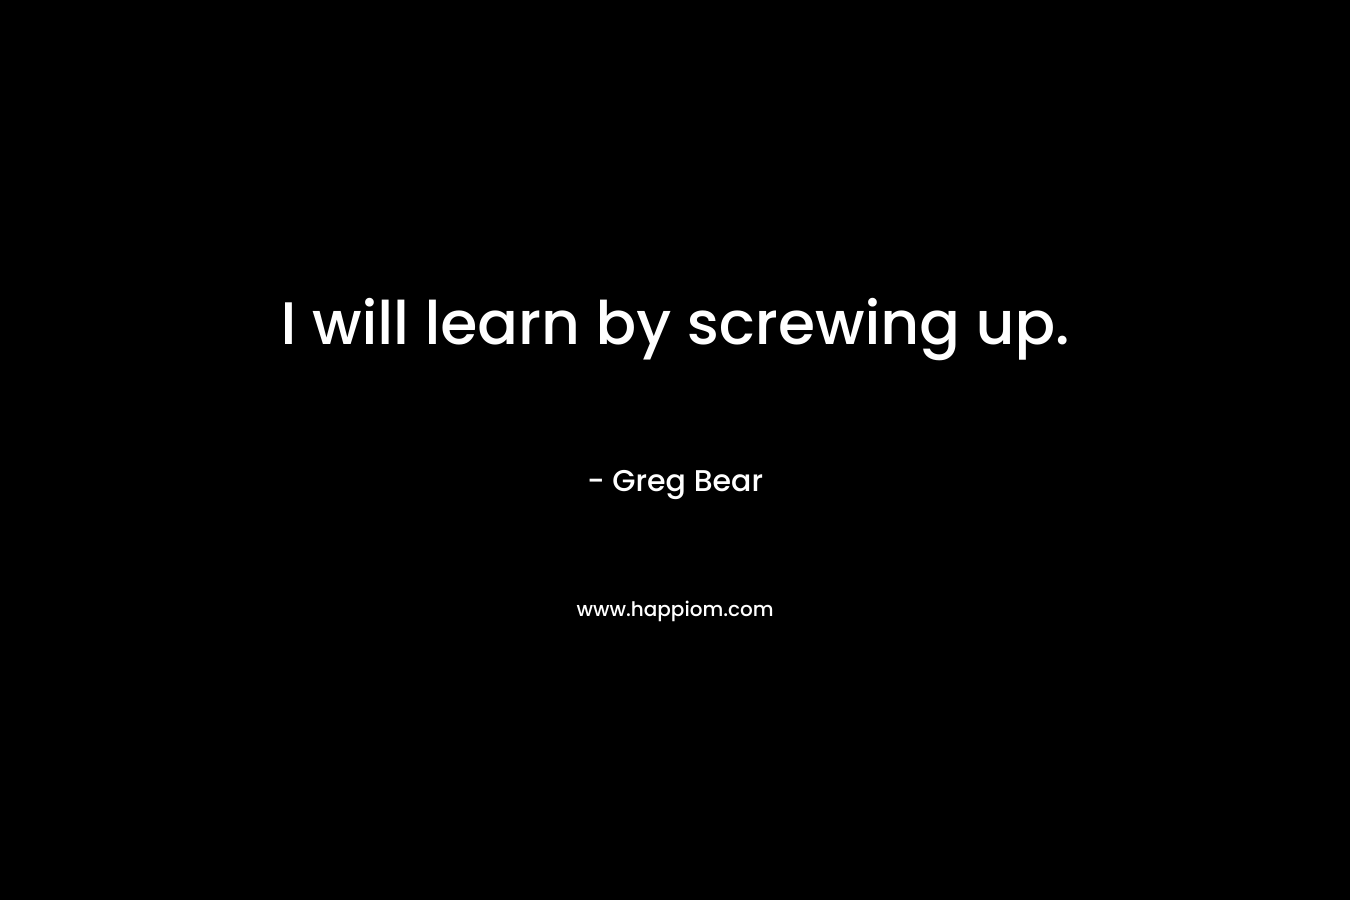 I will learn by screwing up. – Greg Bear